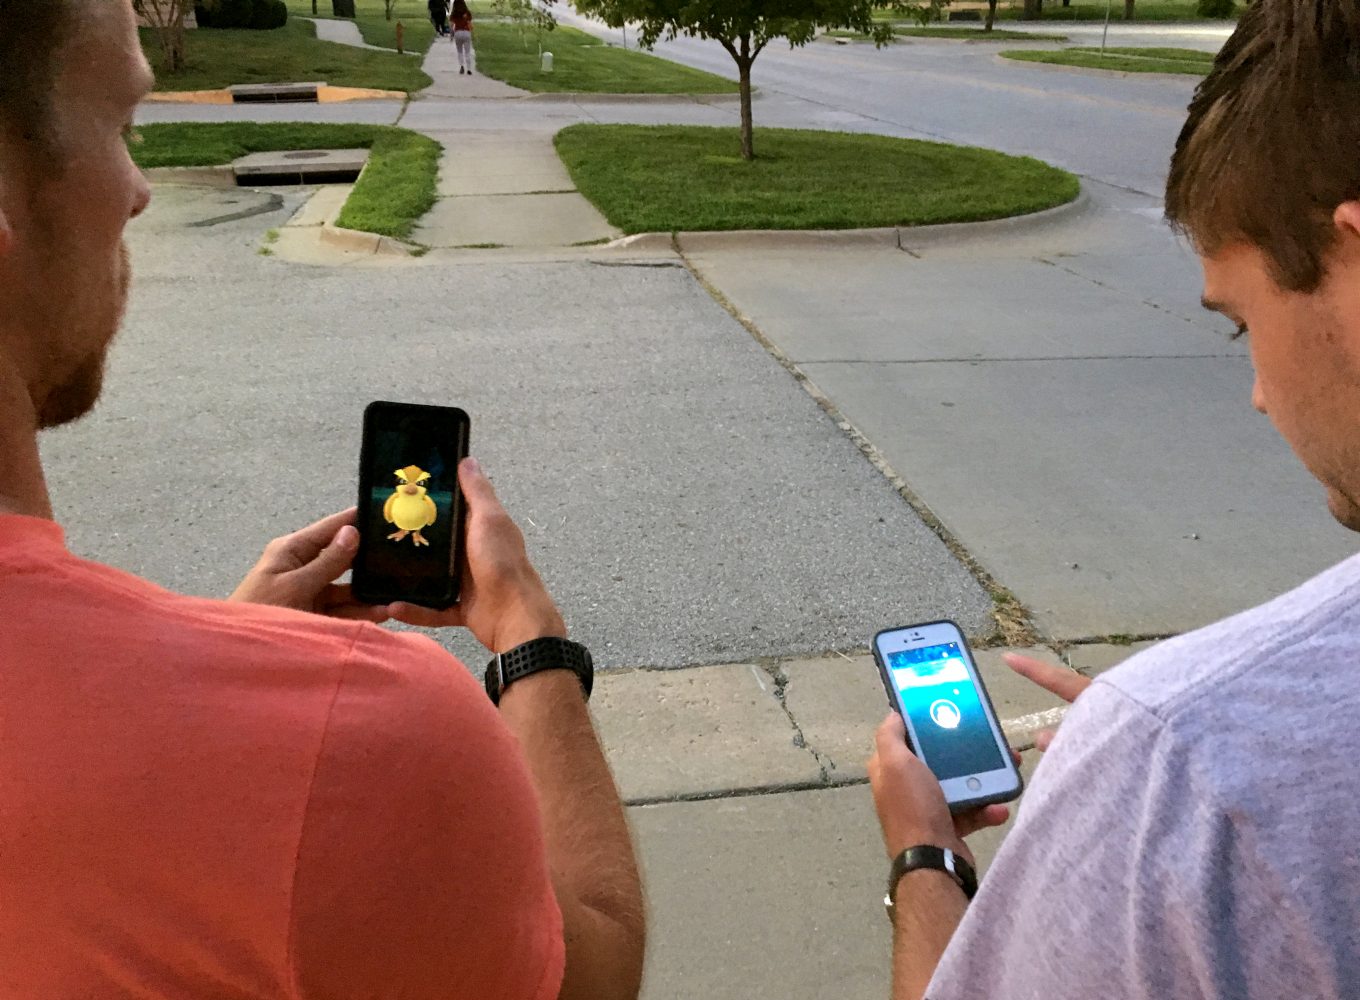 Pokémon Go is catching campus by storm